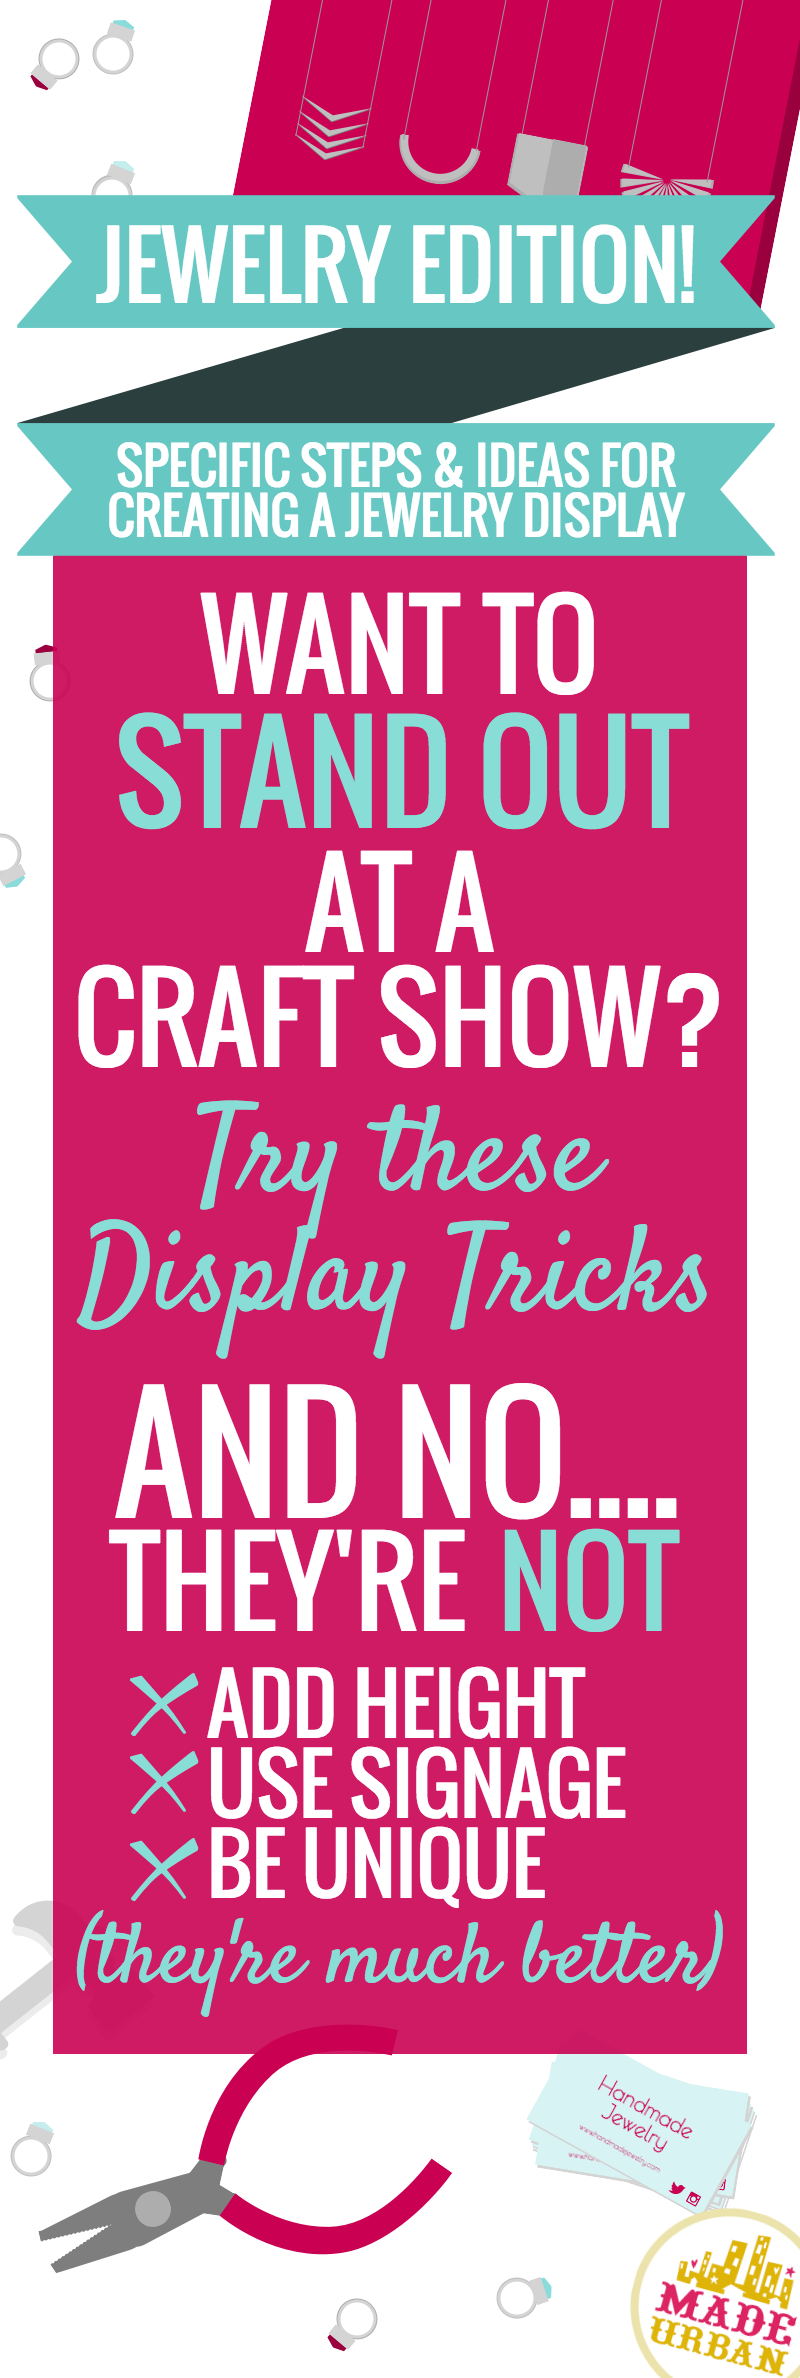 HOW TO DISPLAY JEWELRY AT A CRAFT FAIR – steps, ideas and examples on how to create an effective display for your handmade jewelry